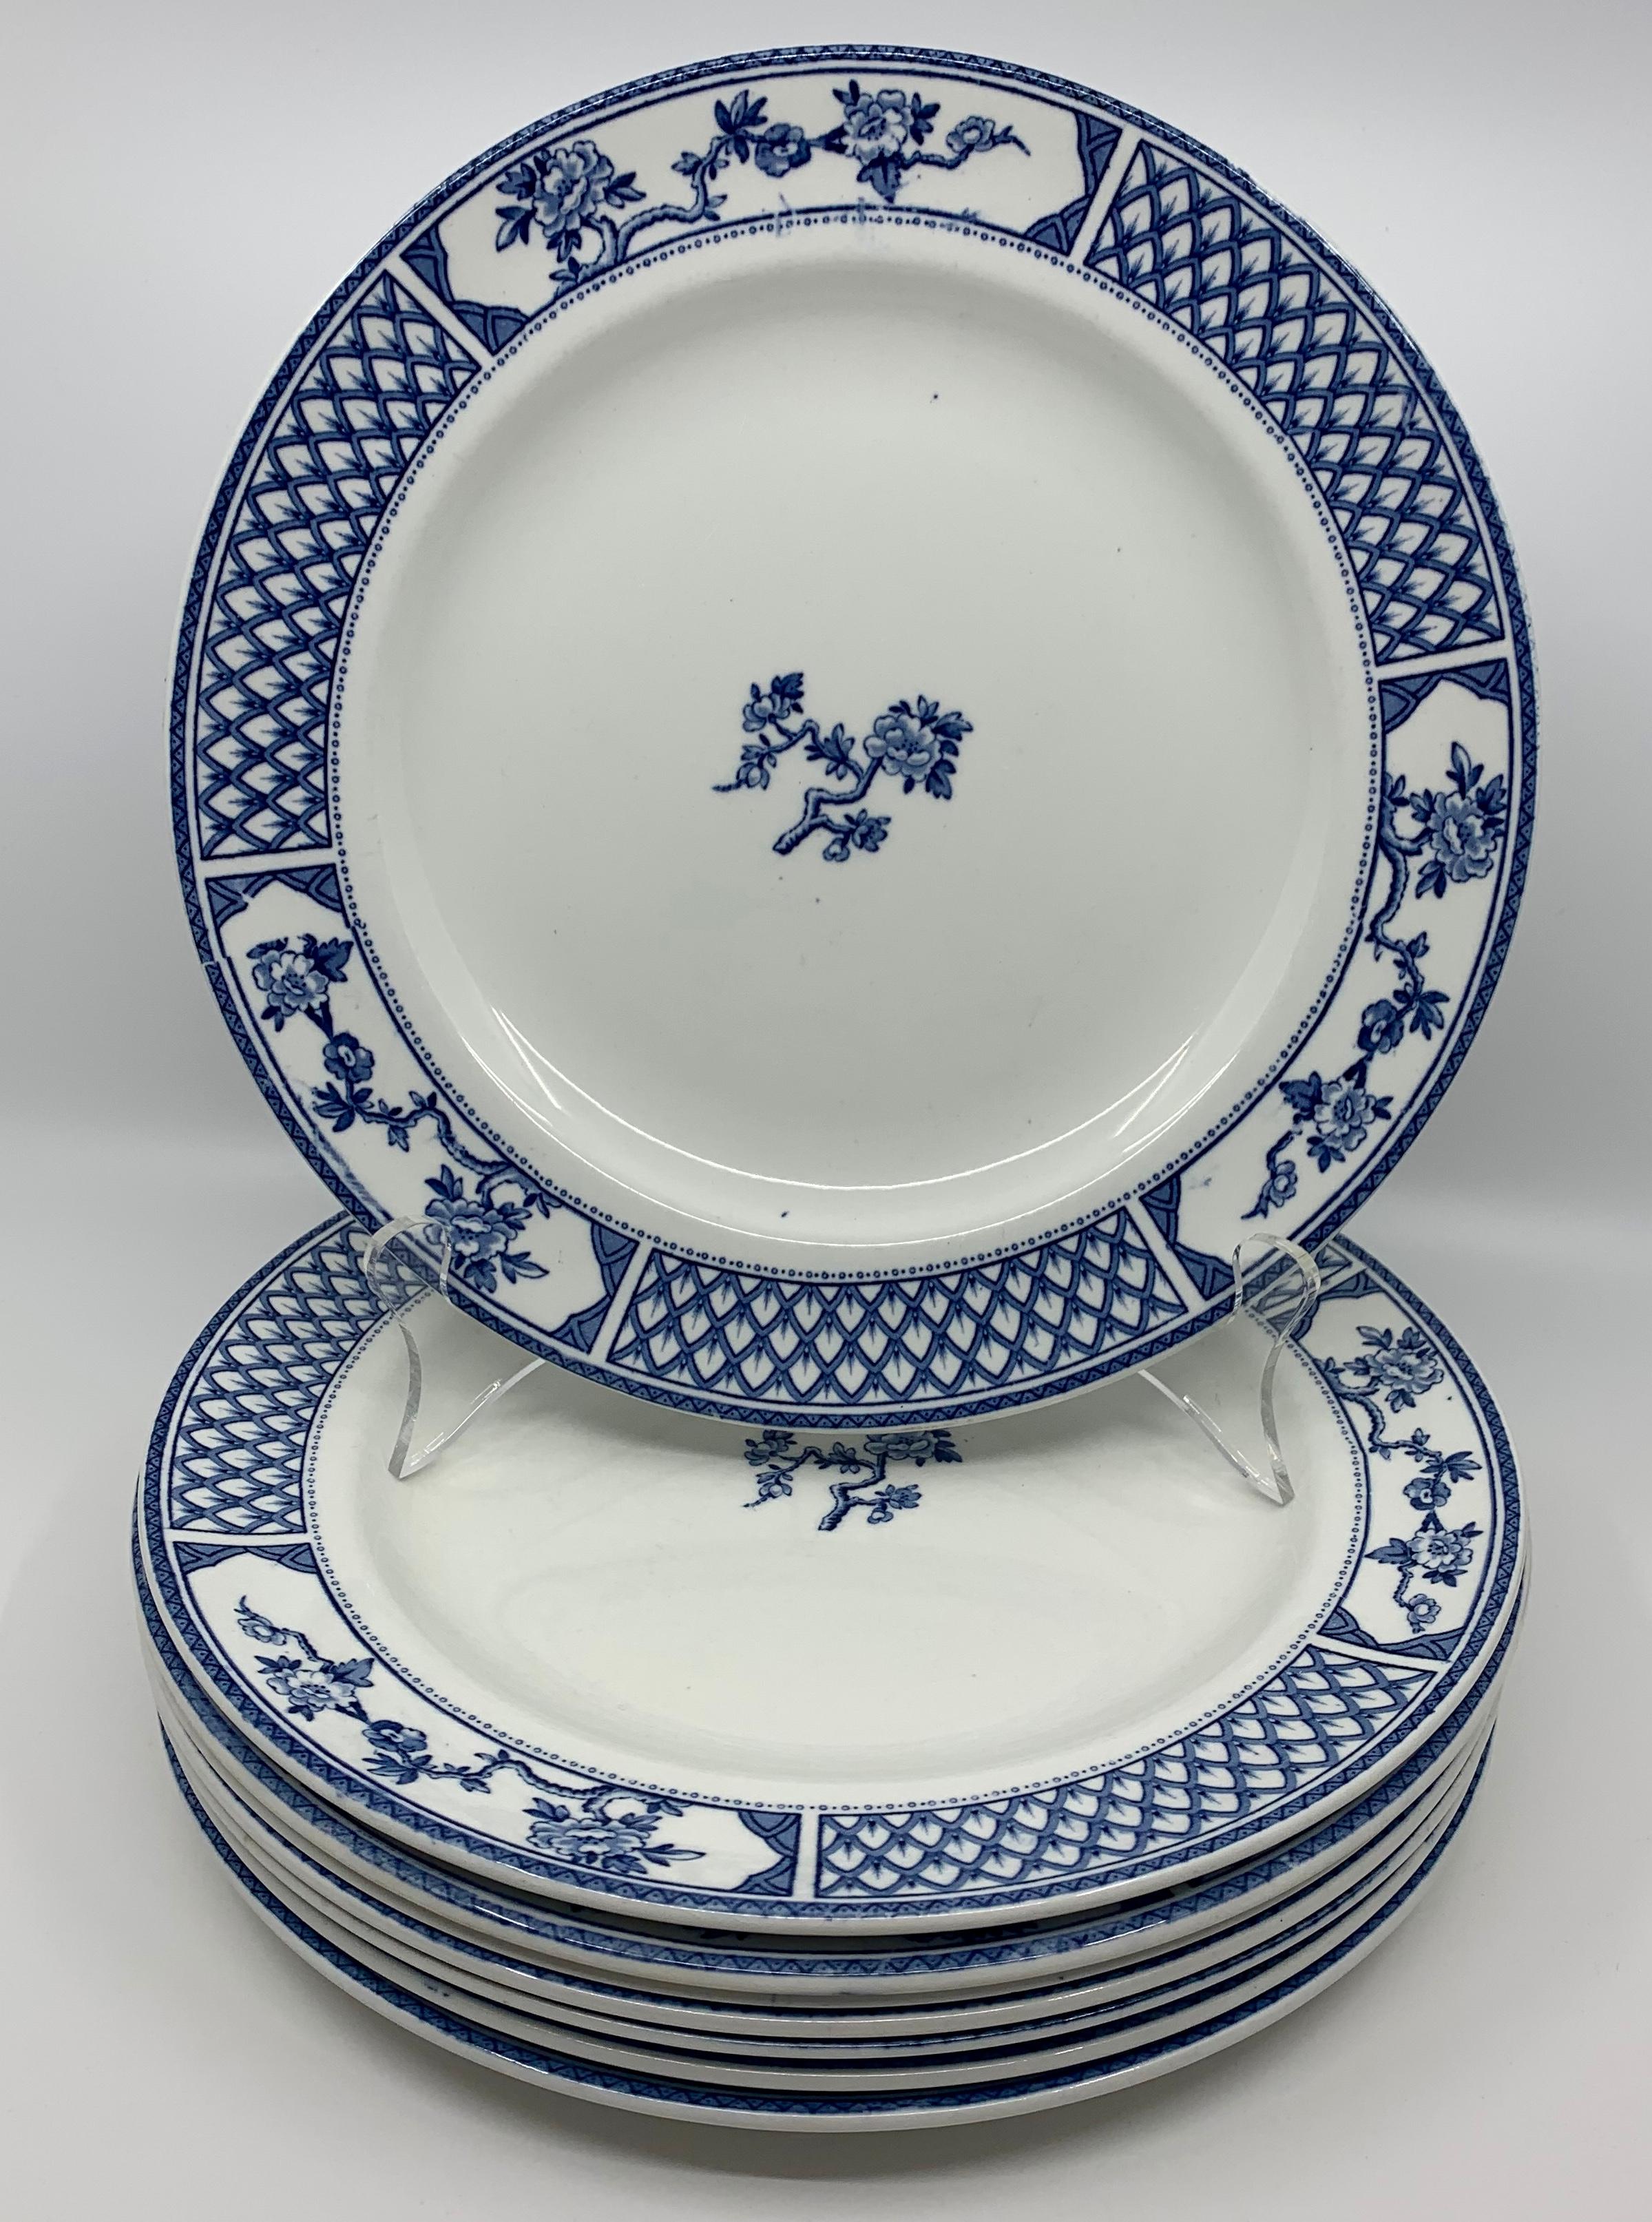 Set of eight of blue and white Exeter plates. Eight white English plates with blue lattice border in between floral reserves centering on one cherry blossom sprig. Classic and handsome blue and white plates. Markings 